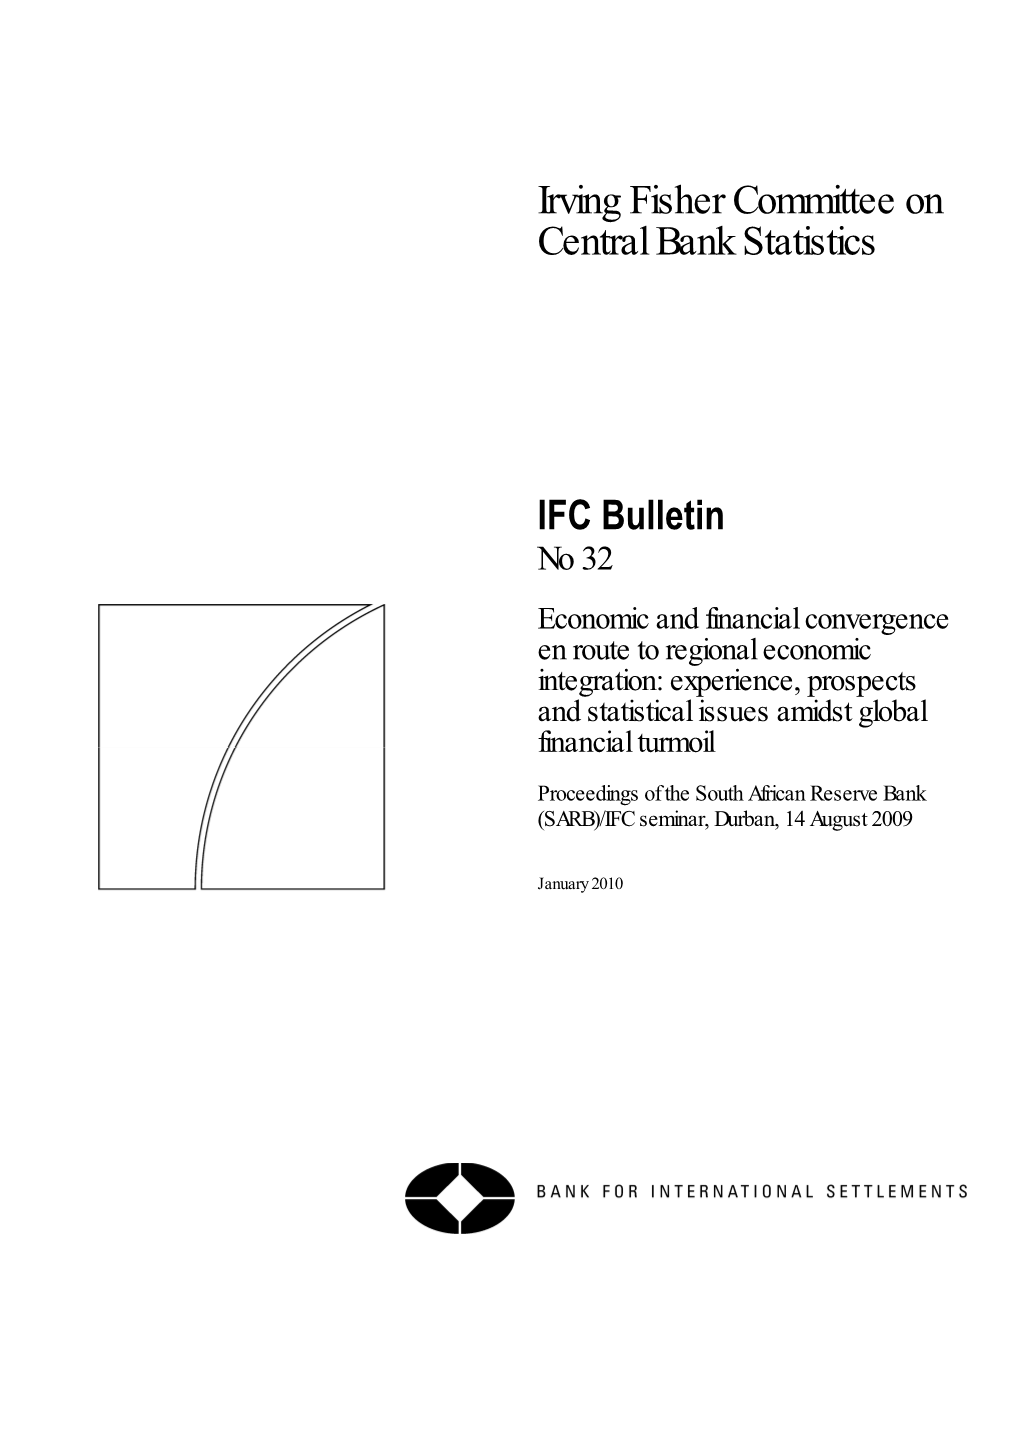 Irving Fisher Committee on Central Bank Statistics IFC Bulletin